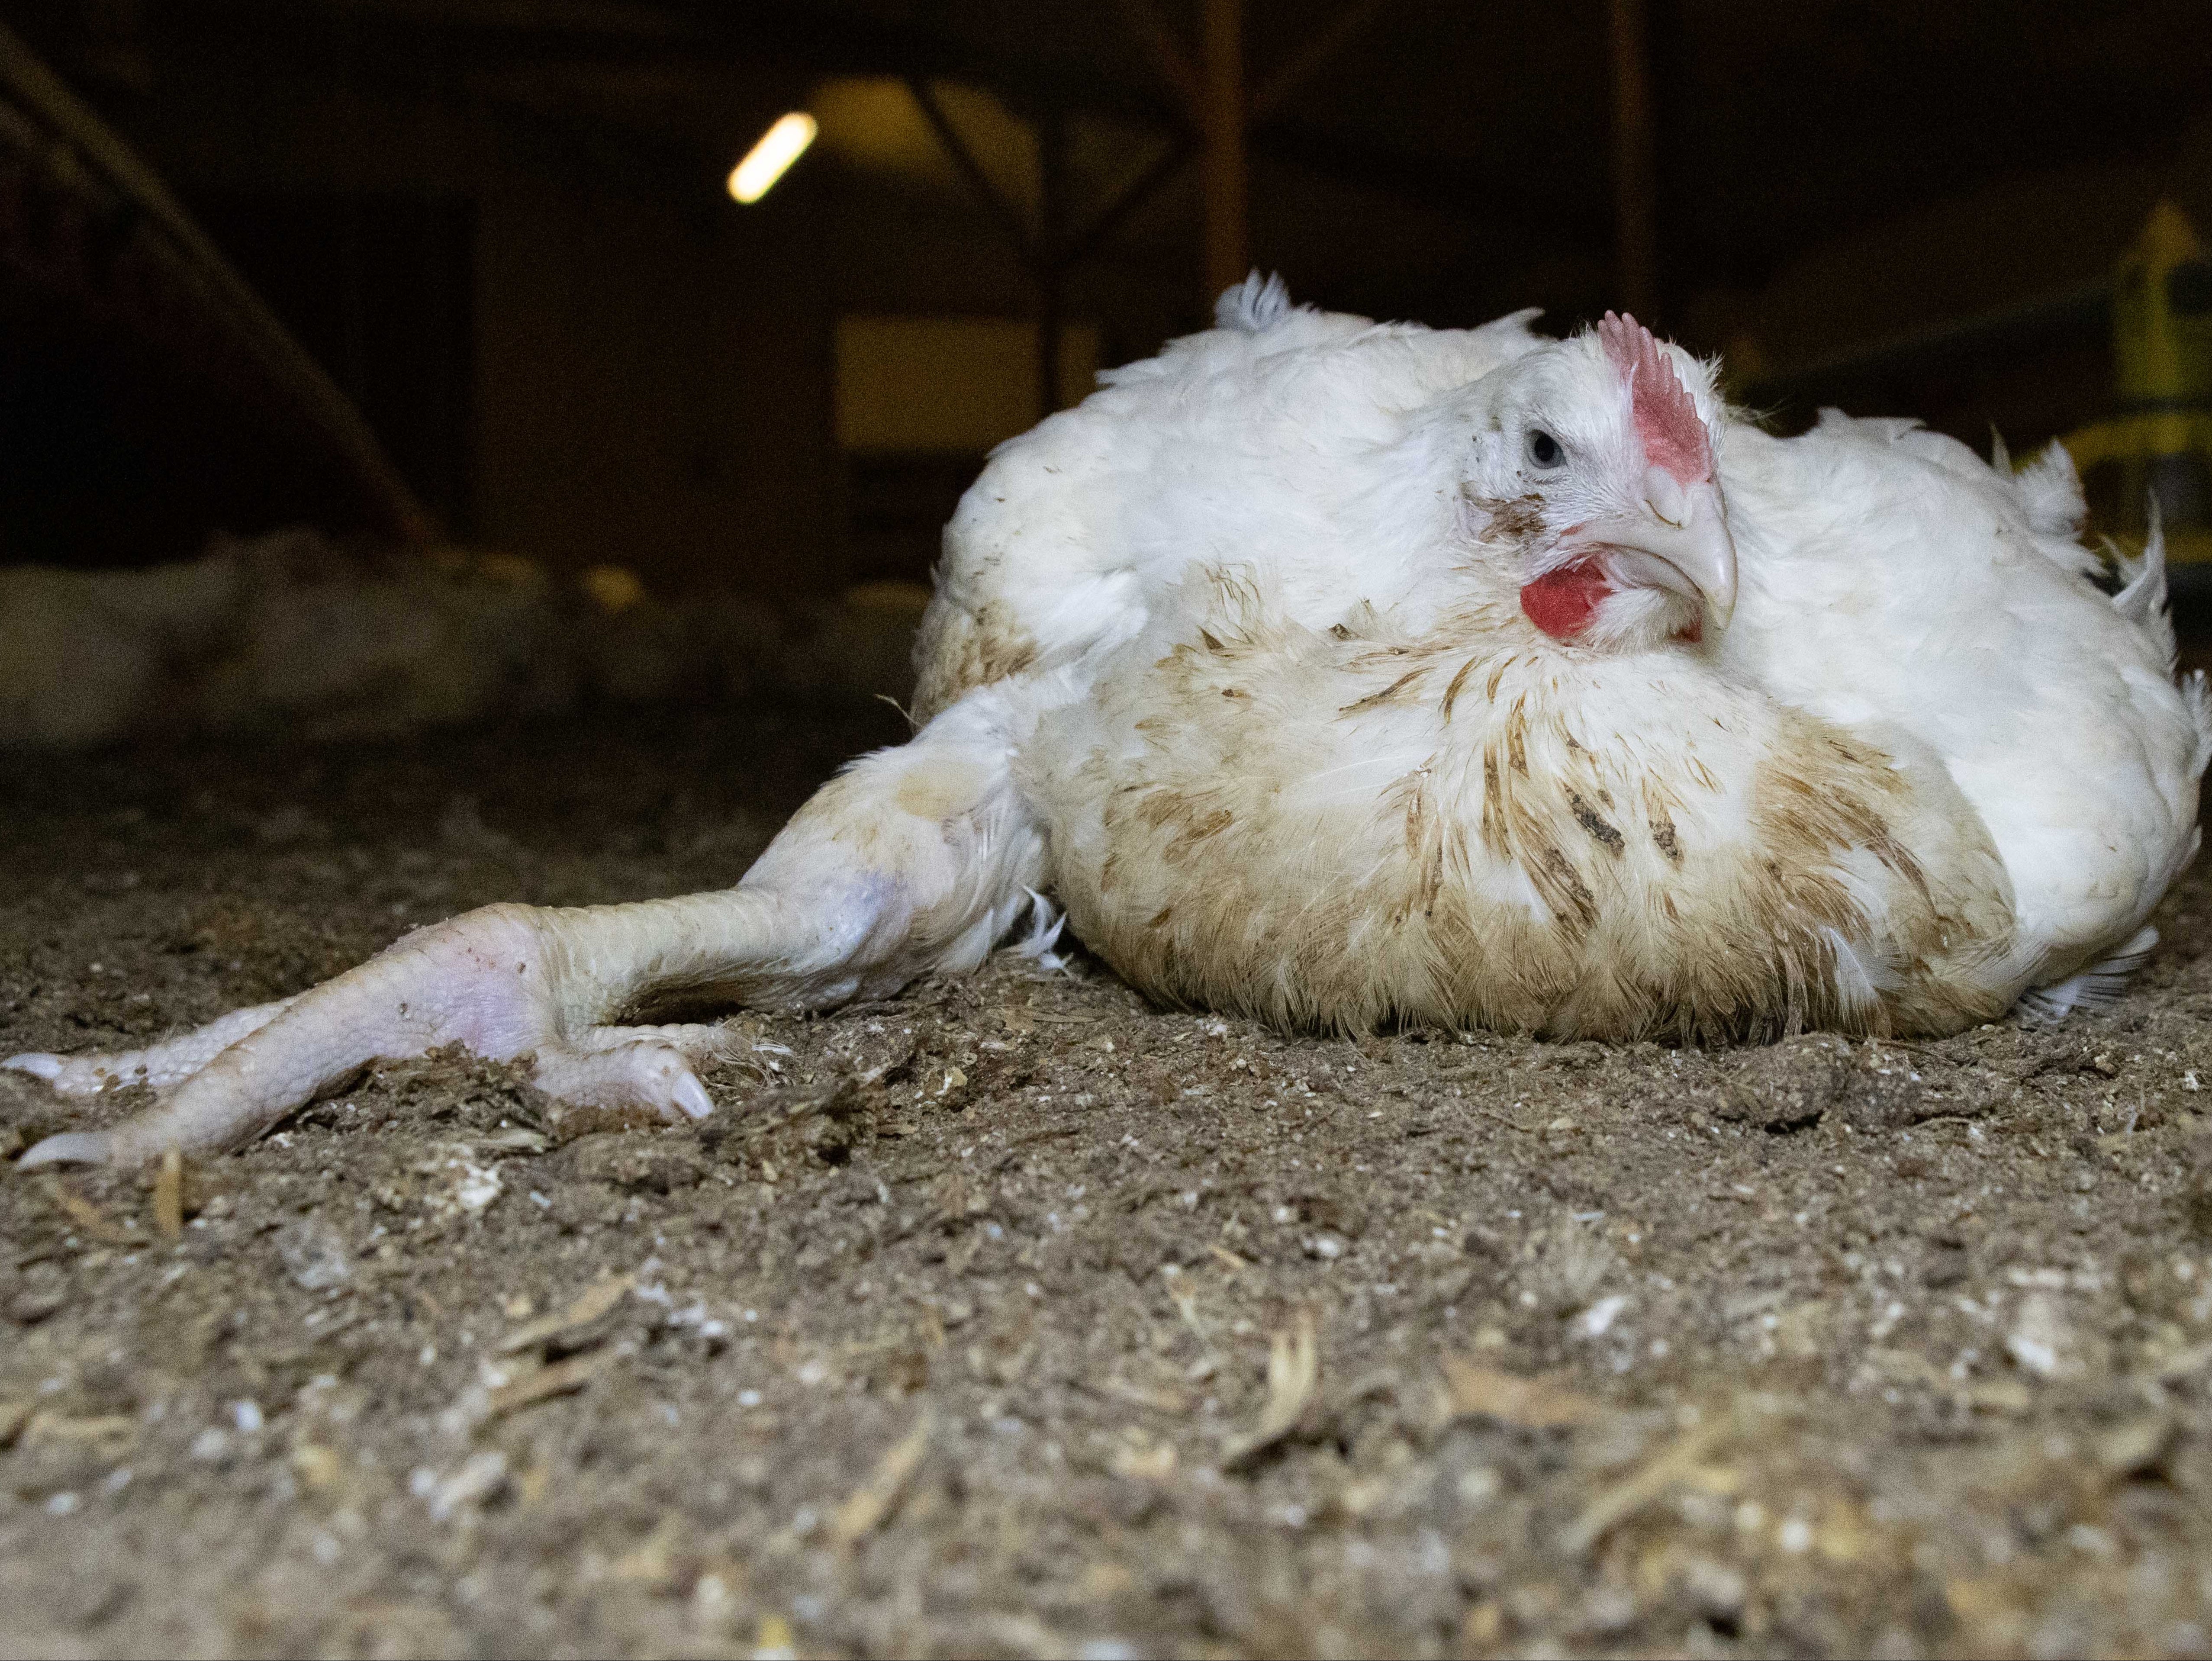 A typical fast-growing chicken that cannot support its own weight and is susceptible to heat extremes